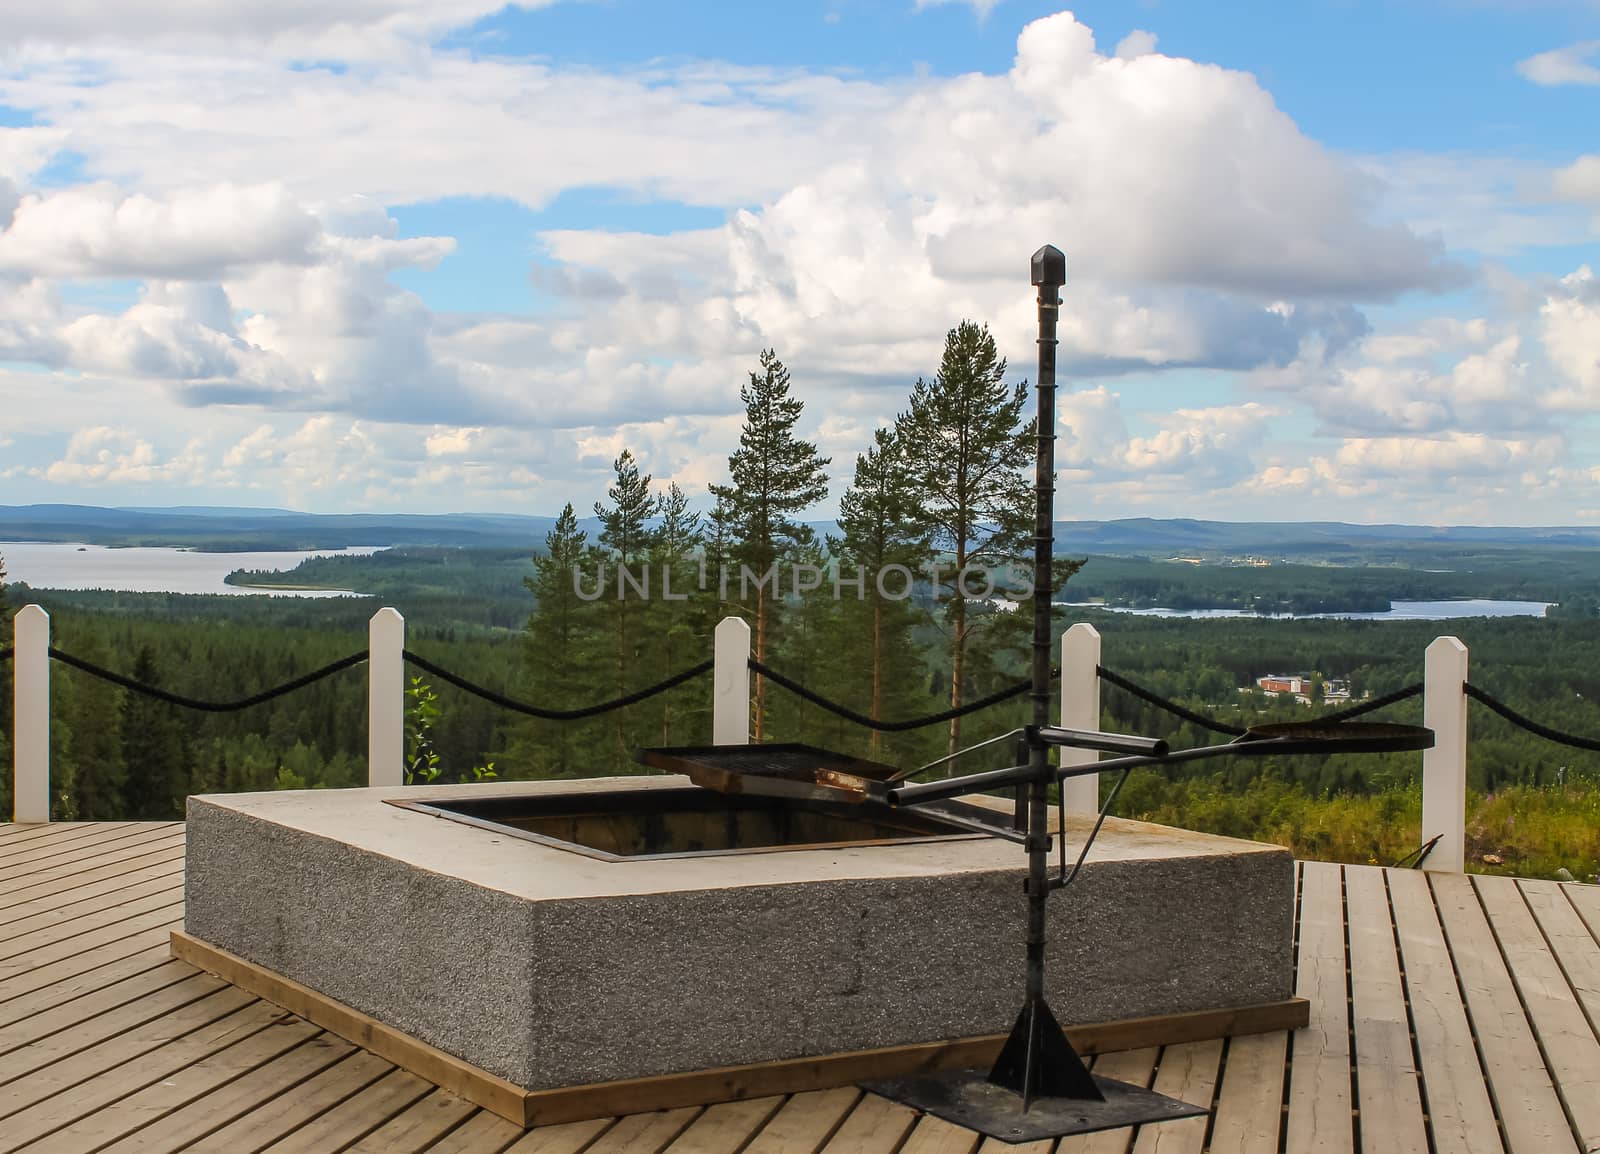 Scenic picnic place overlooking lakes and forests of northern Finland